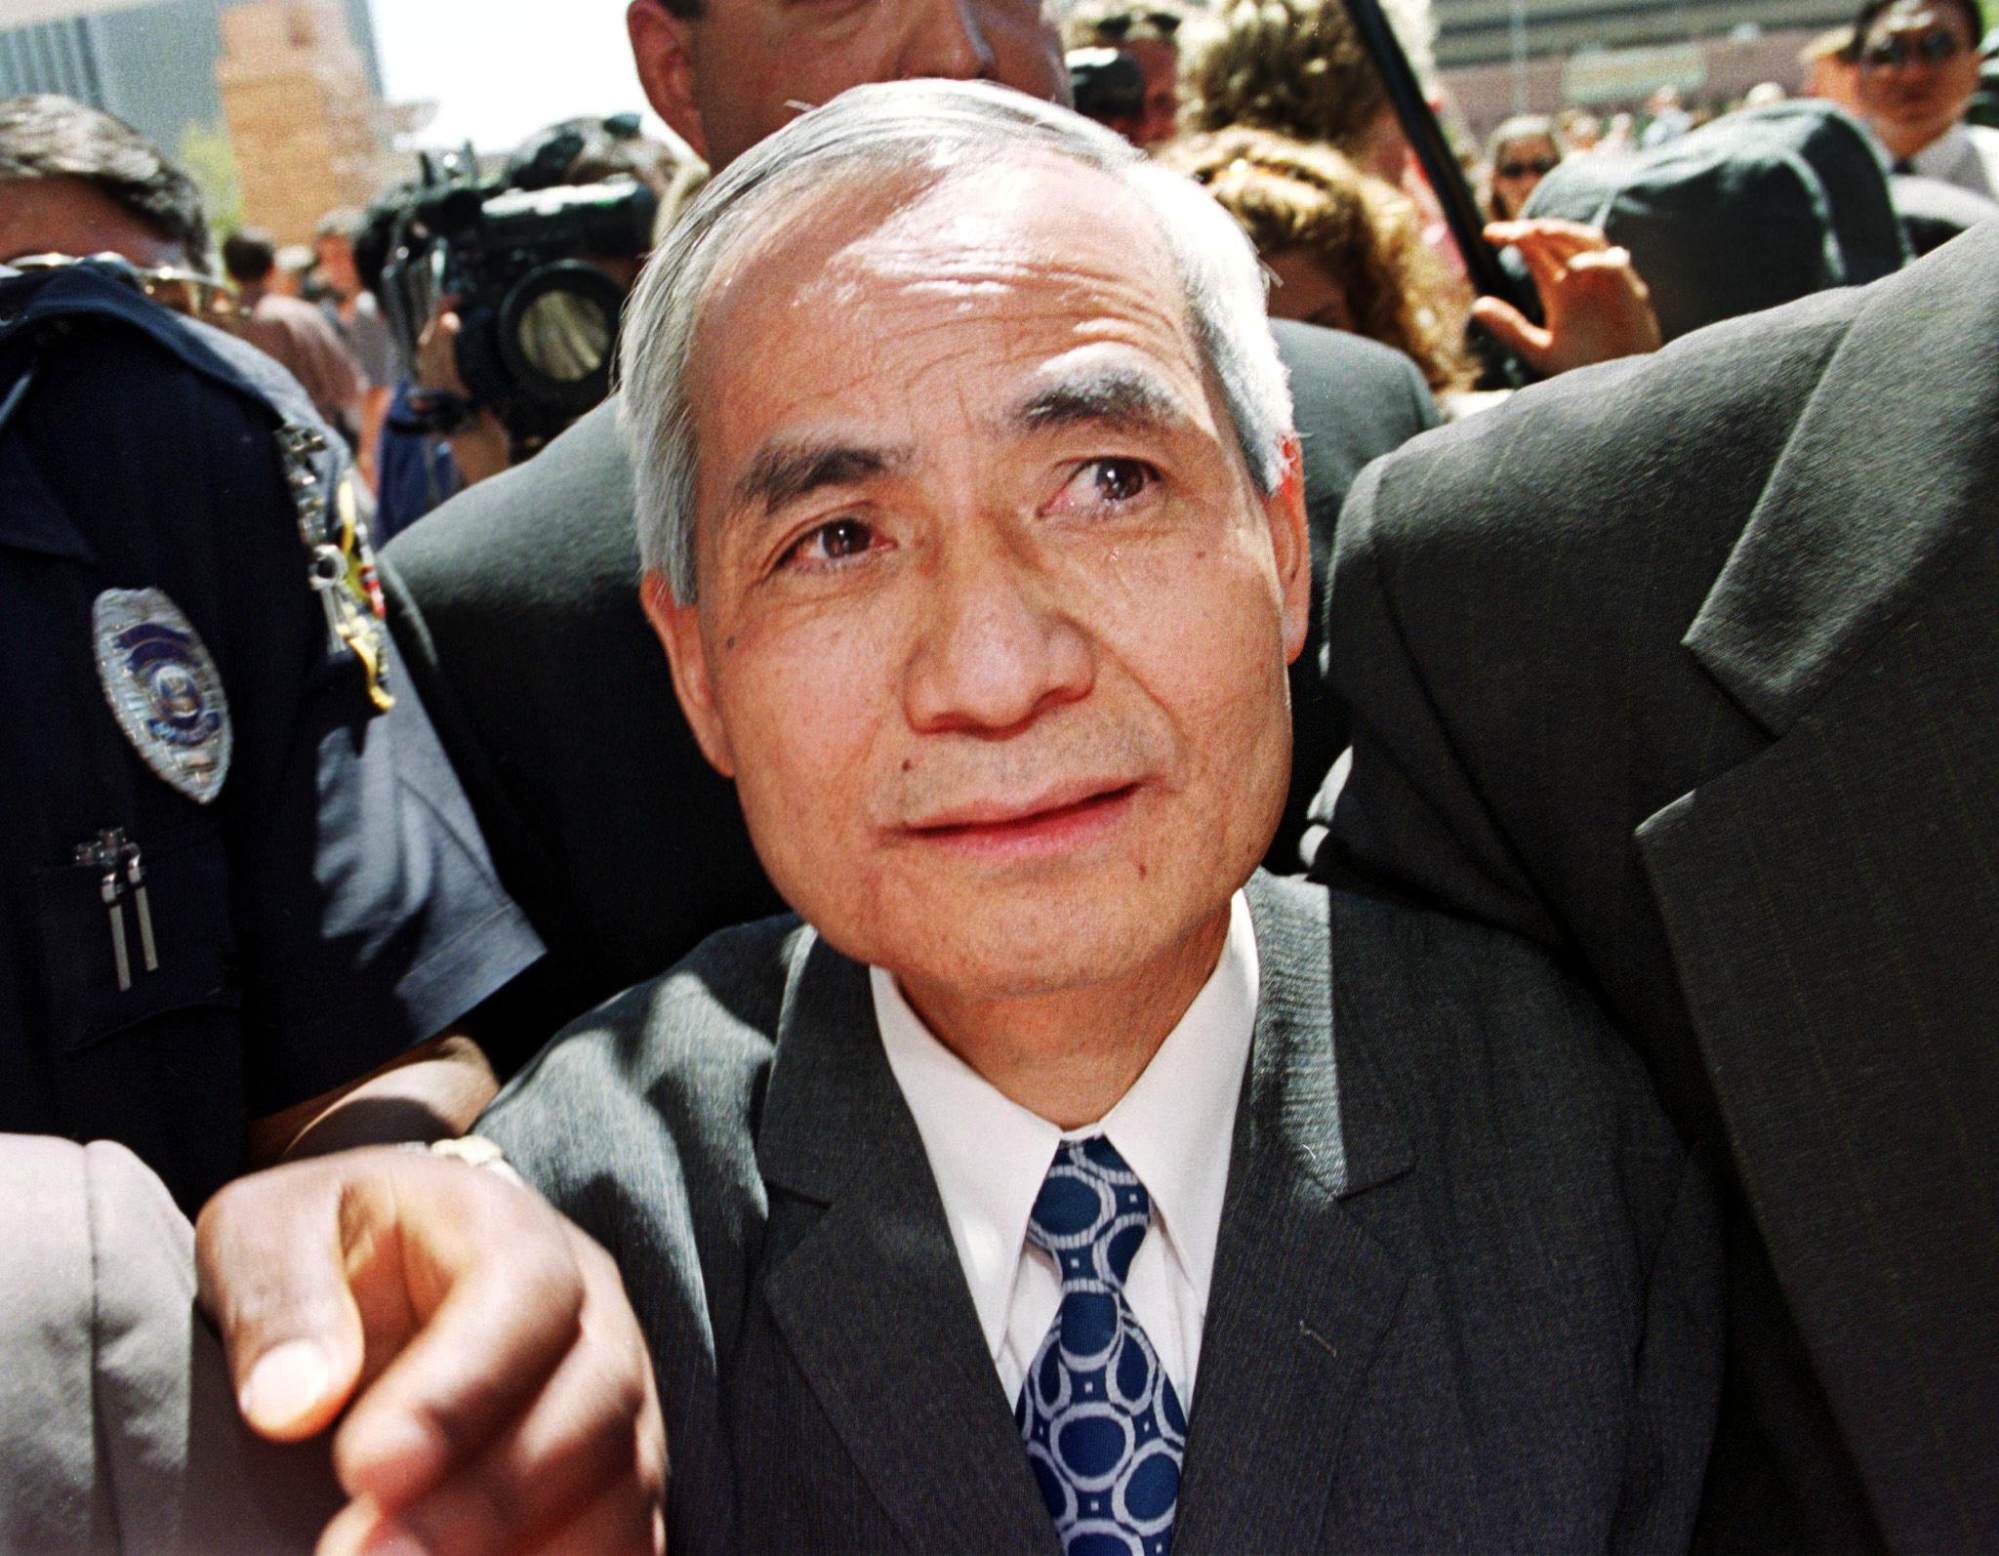 Former Los Alamos National Laboratory nuclear scientist Li Wenho is escorted back into the federal courthouse after addressing the media following his release from nine months of solitary confinement on September 13, 2000, in Albuquerque, New Mexico, USA. Photo: AFP